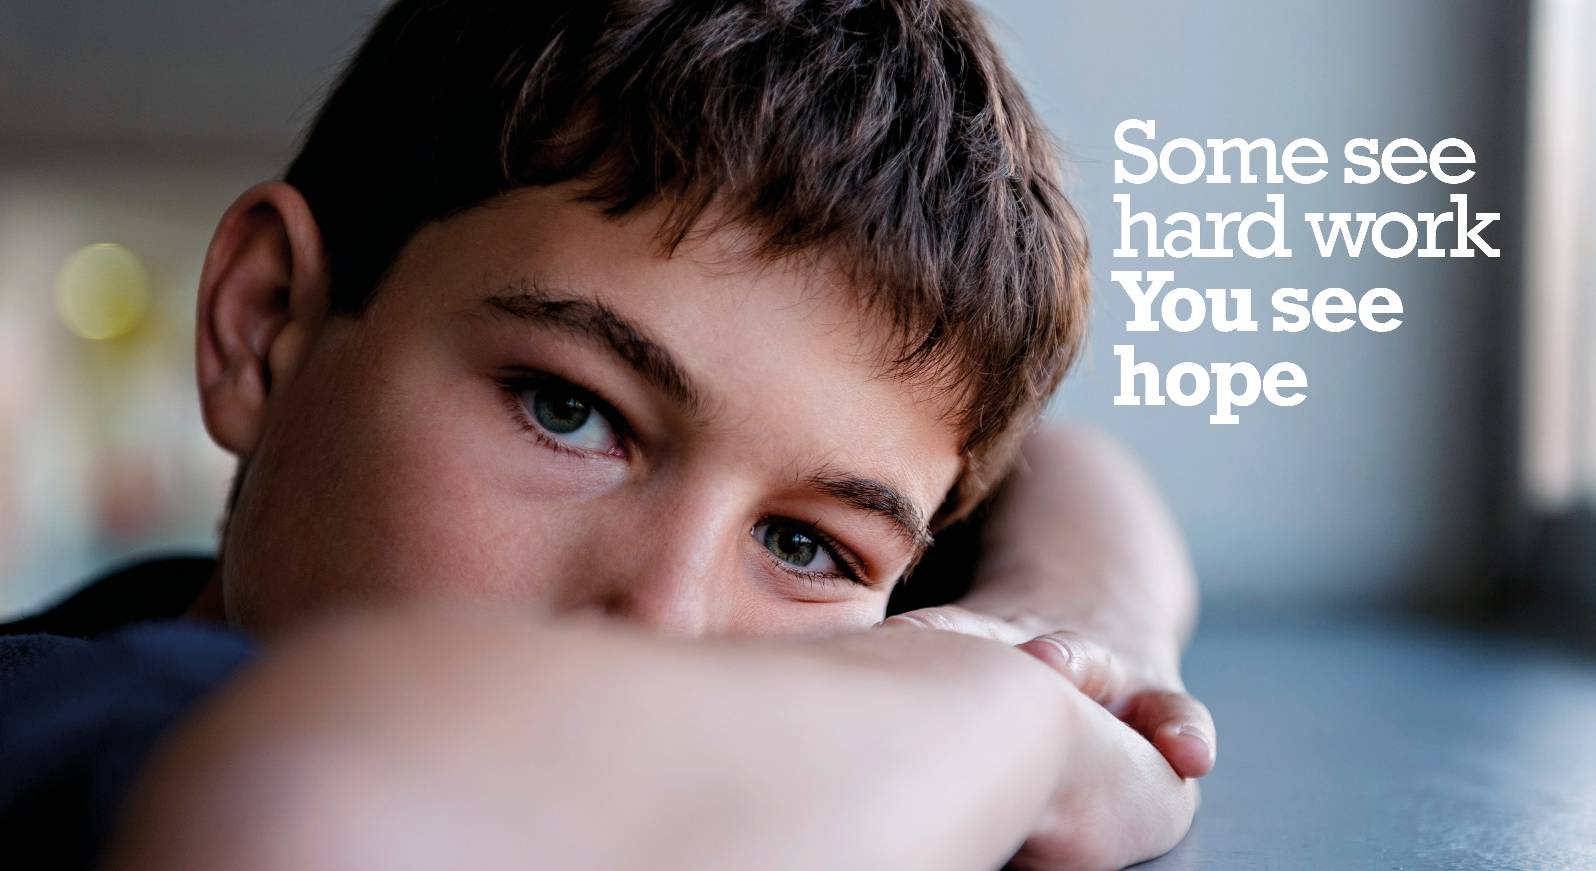 Council Launches Campaign To Find Foster Carers For Teenagers News 